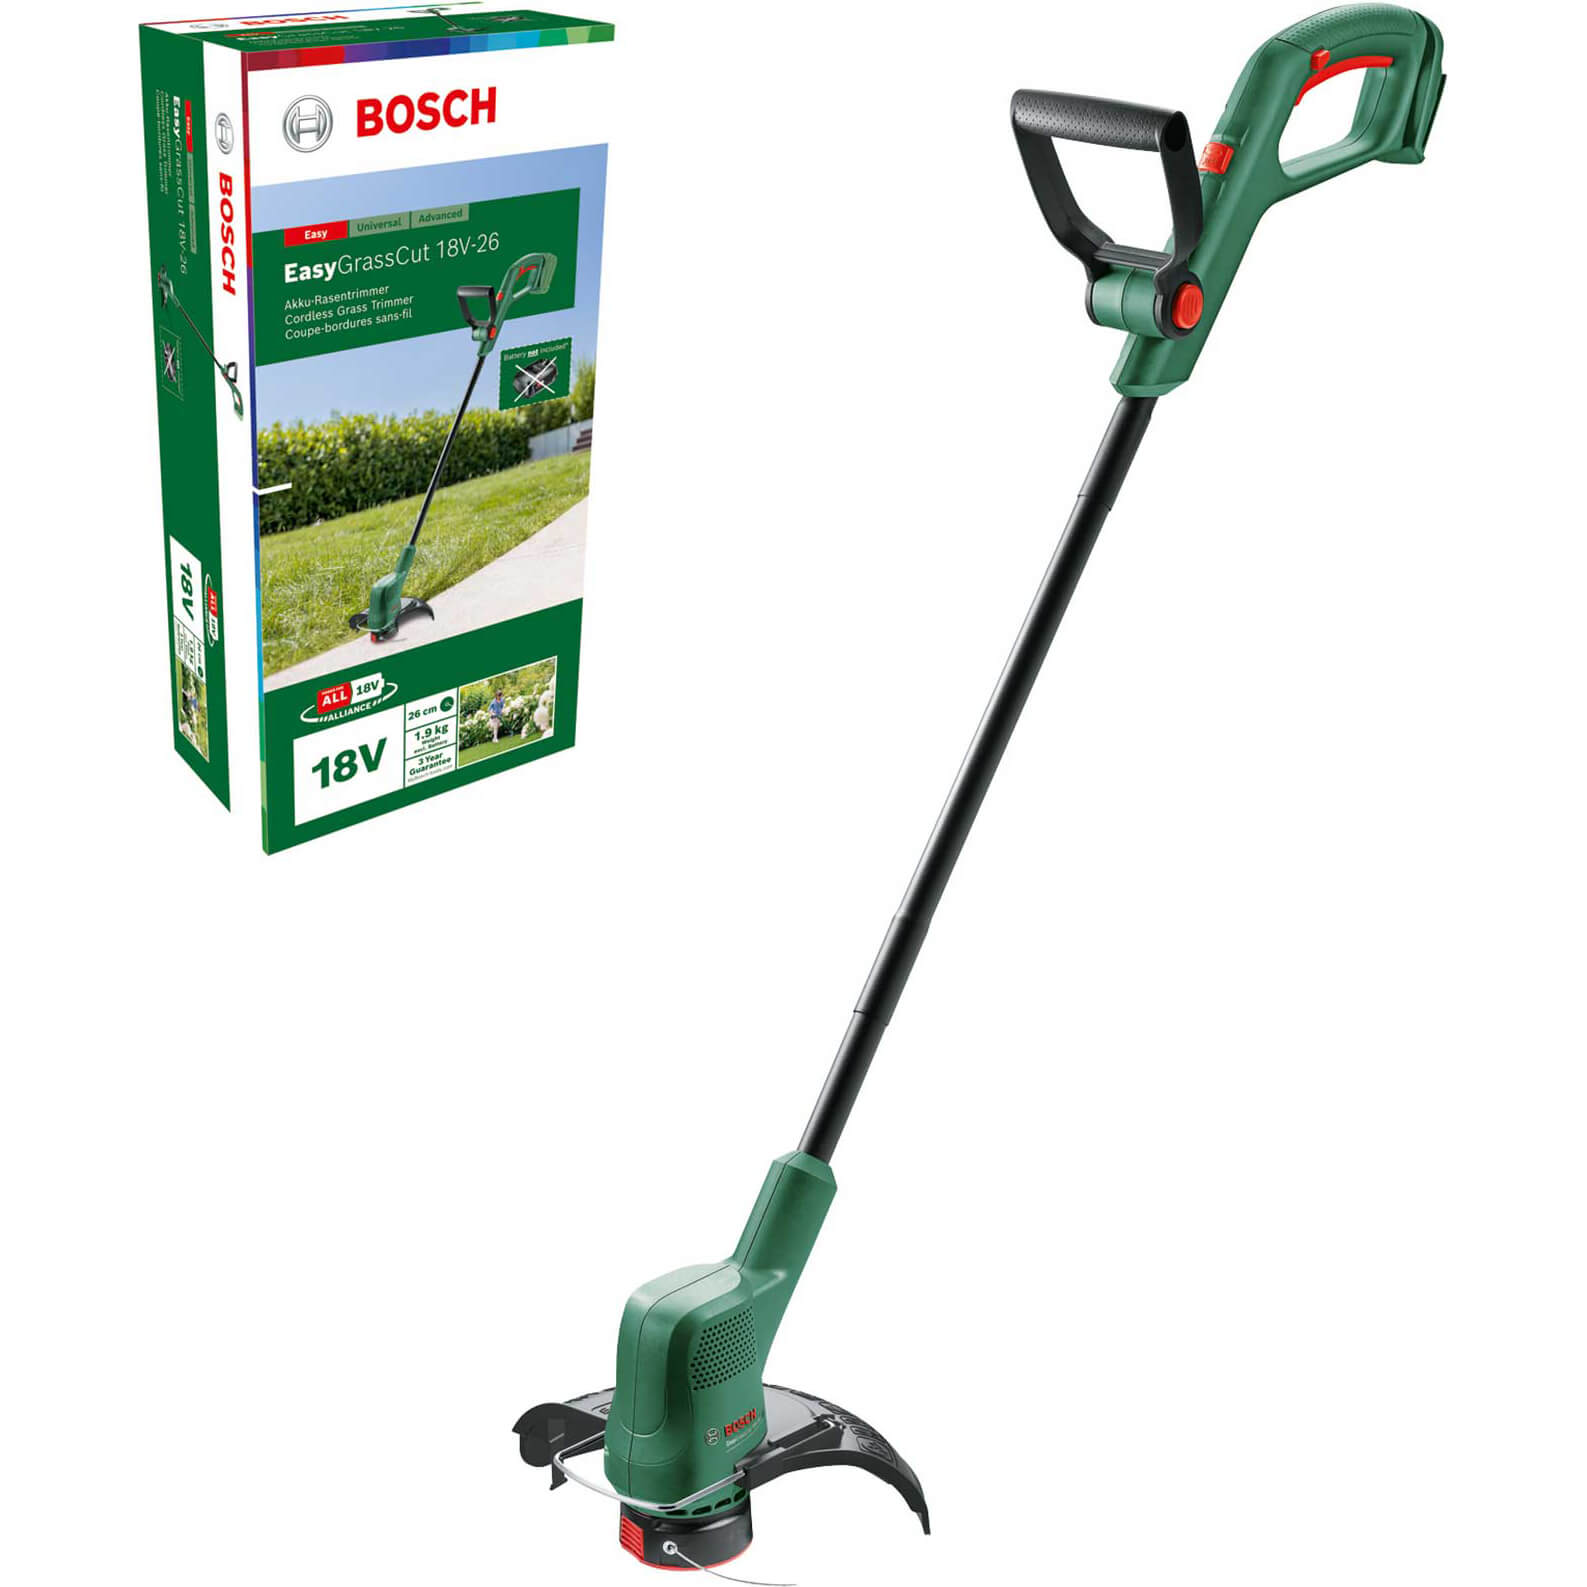 Bosch EASYGRASSCUT 18V-26 P4A 18v Cordless Grass Trimmer and Edger 260mm No Batteries No Charger